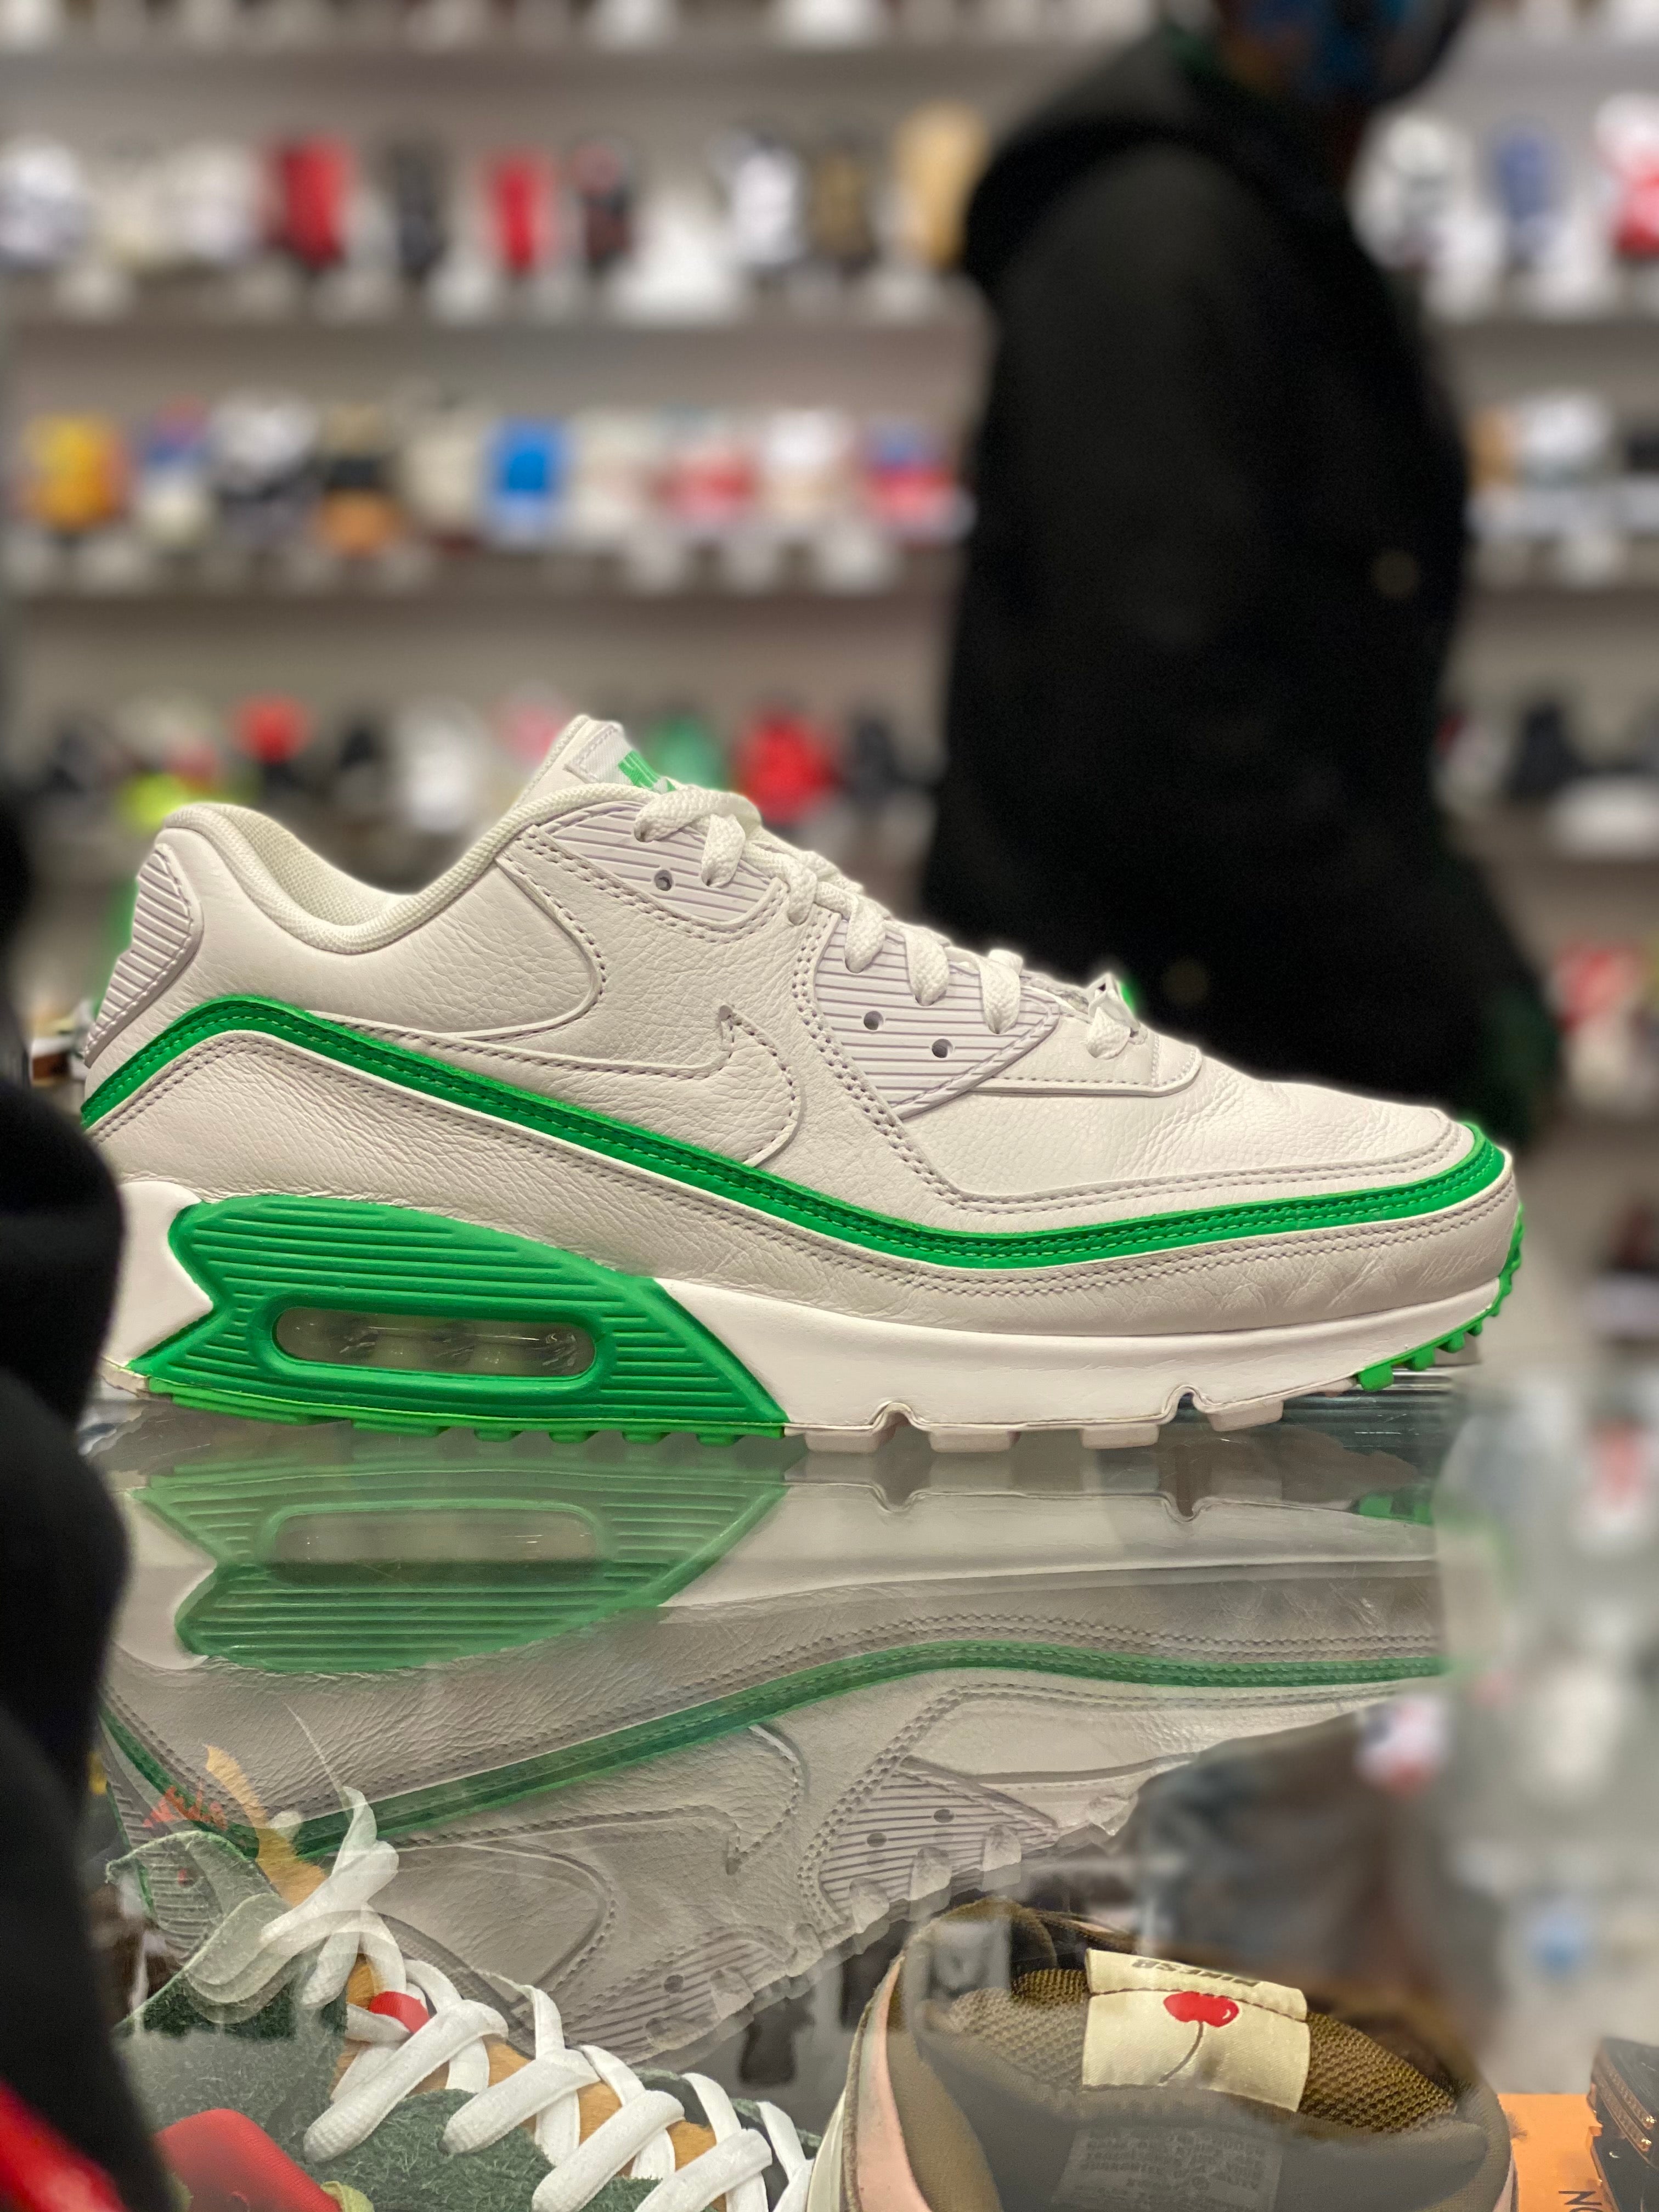 Nike Air Max 90 Undefeated “White Green”